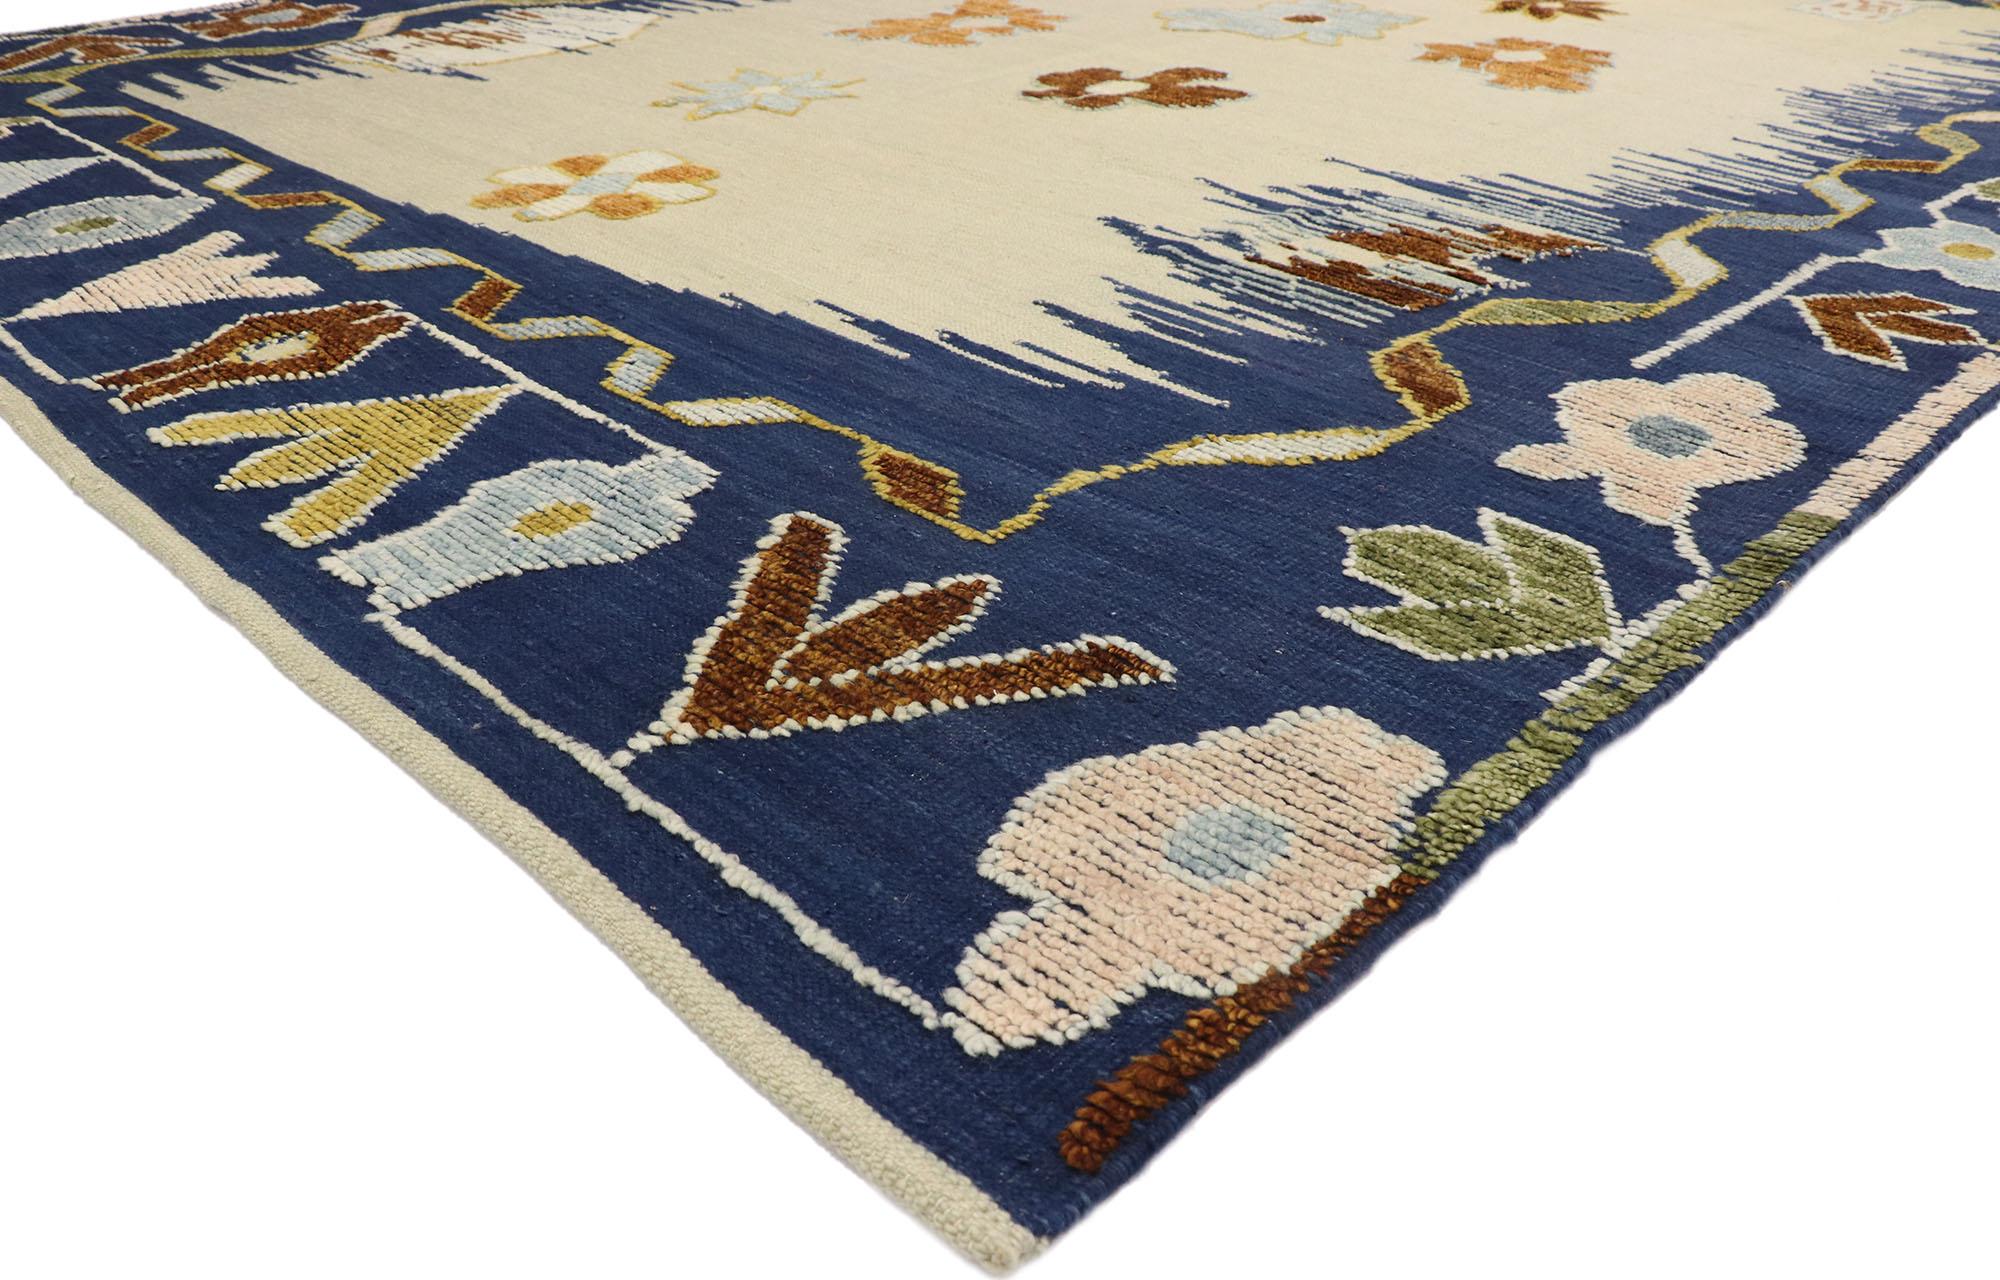 30516 New Oushak High-Low Rug, 10'03 x 13'07. Exhibiting a raised design characterized by remarkable detail and texture, this Oushak high-low rug emerges as a captivating masterpiece of woven beauty. The interplay of geometric patterns and vibrant